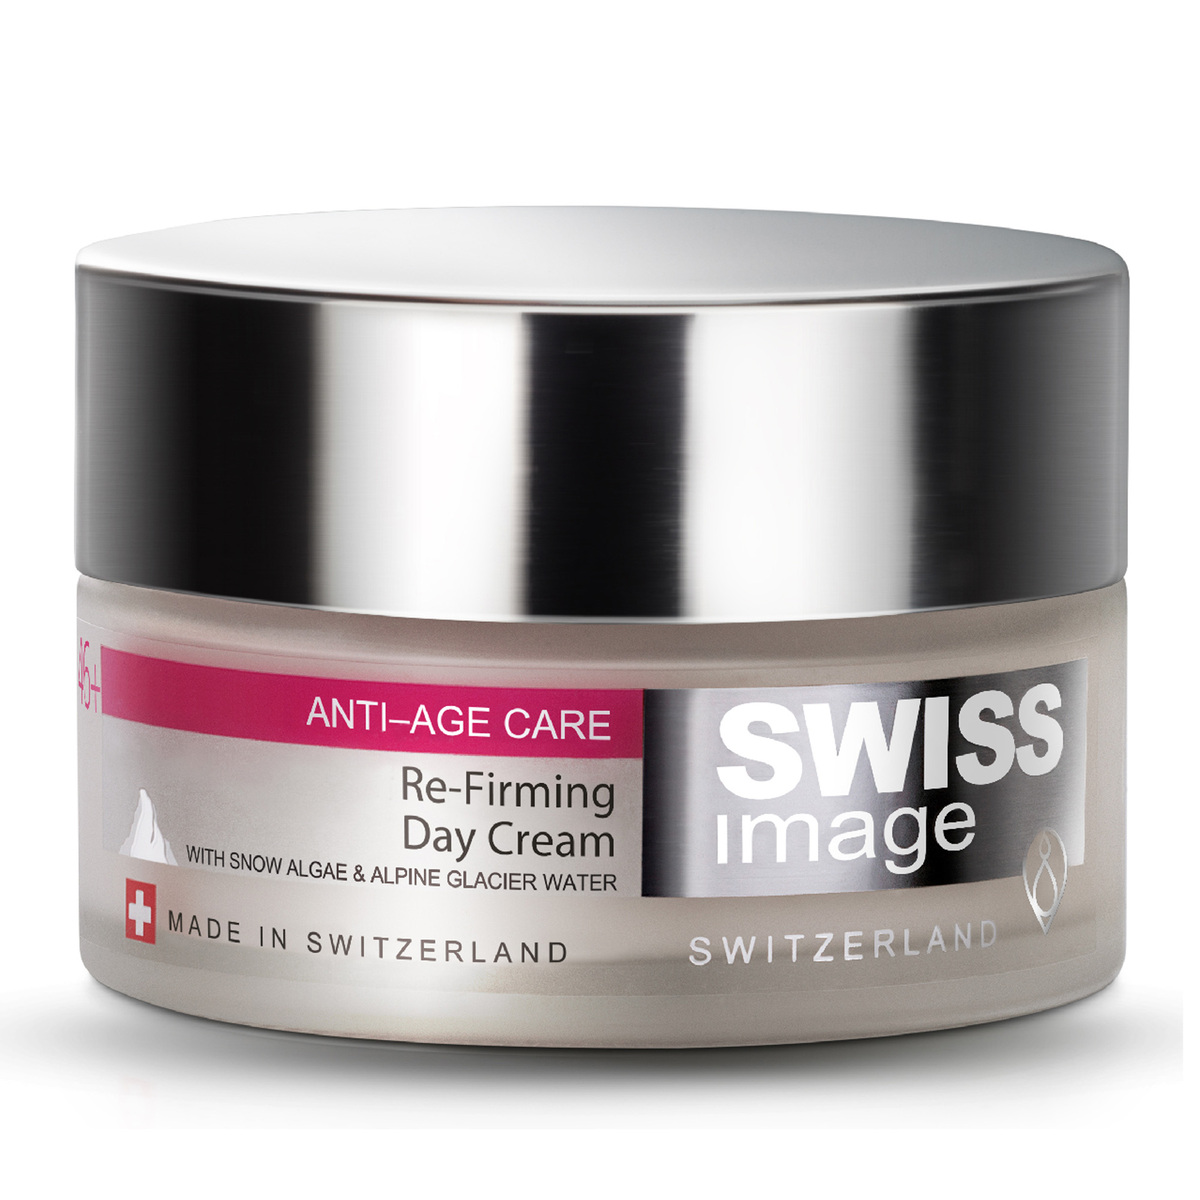 Swiss Image Anti Age Care Re-Firming Day Cream, 50 ml